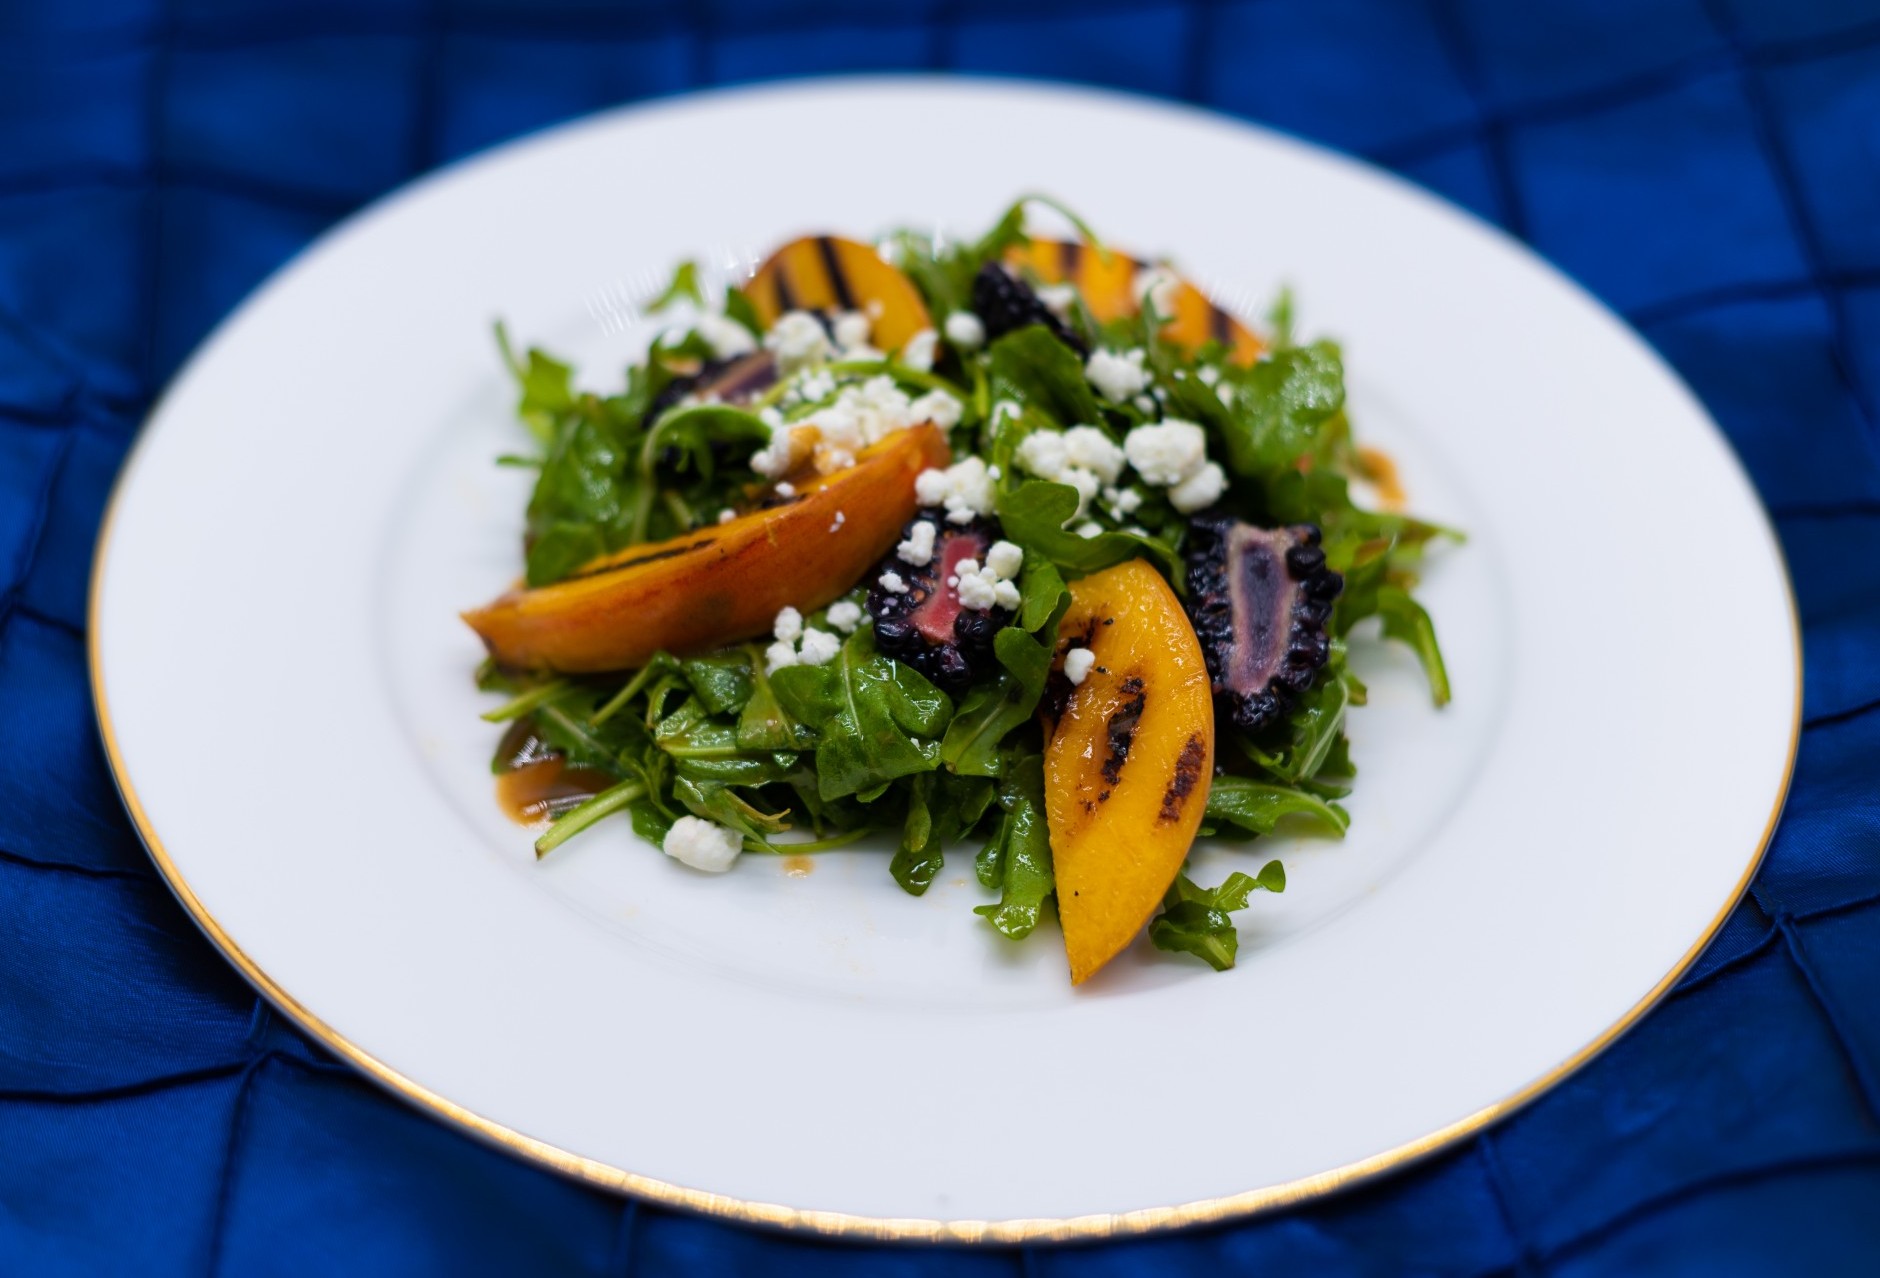 Grilled Peaches and Arugula Salad with Blackberries Crumbled Goat Cheese and Balsamic Vinegar Dressing